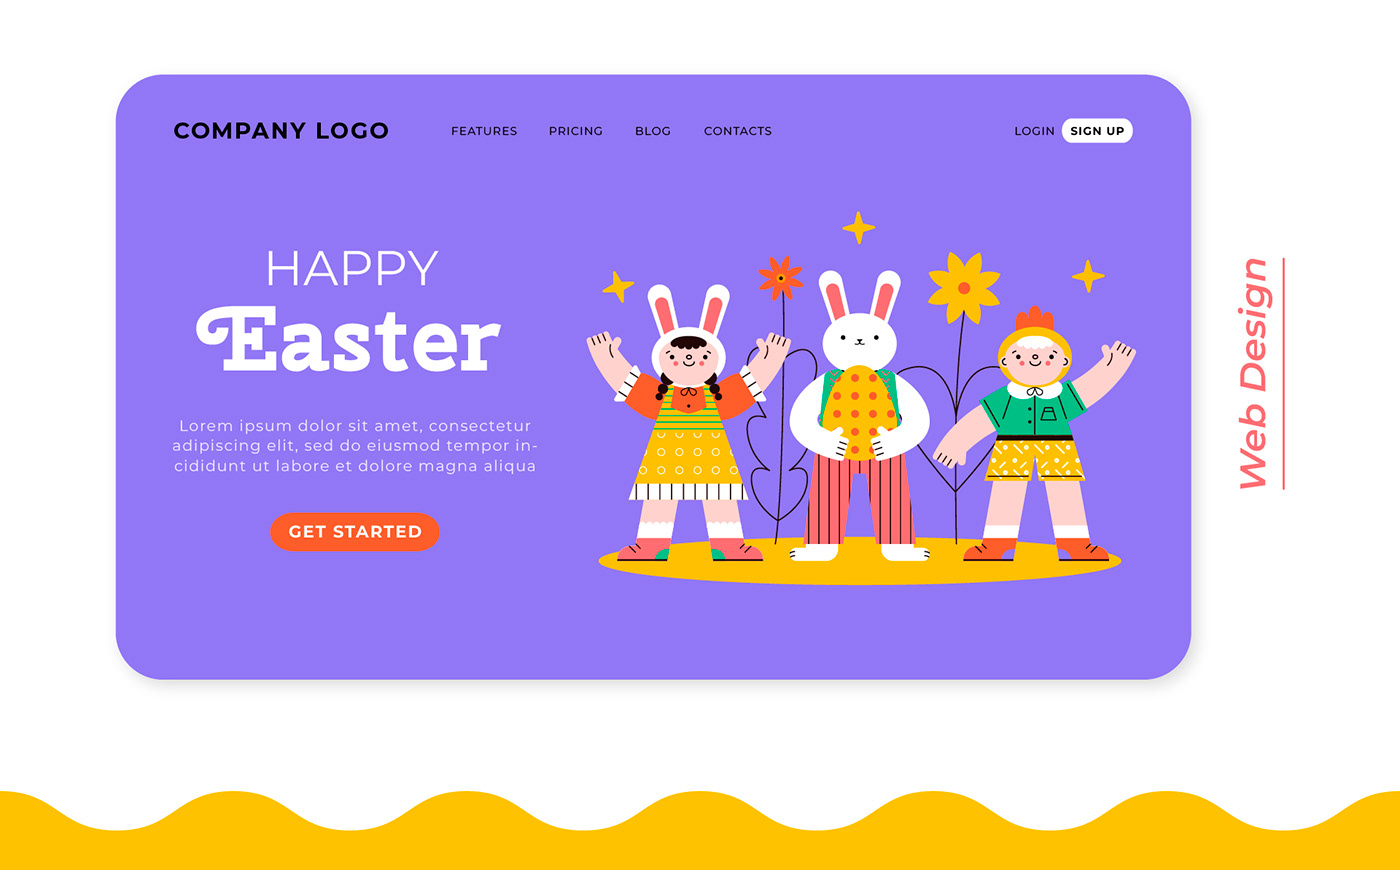 Landing page design with easter vector illustration.